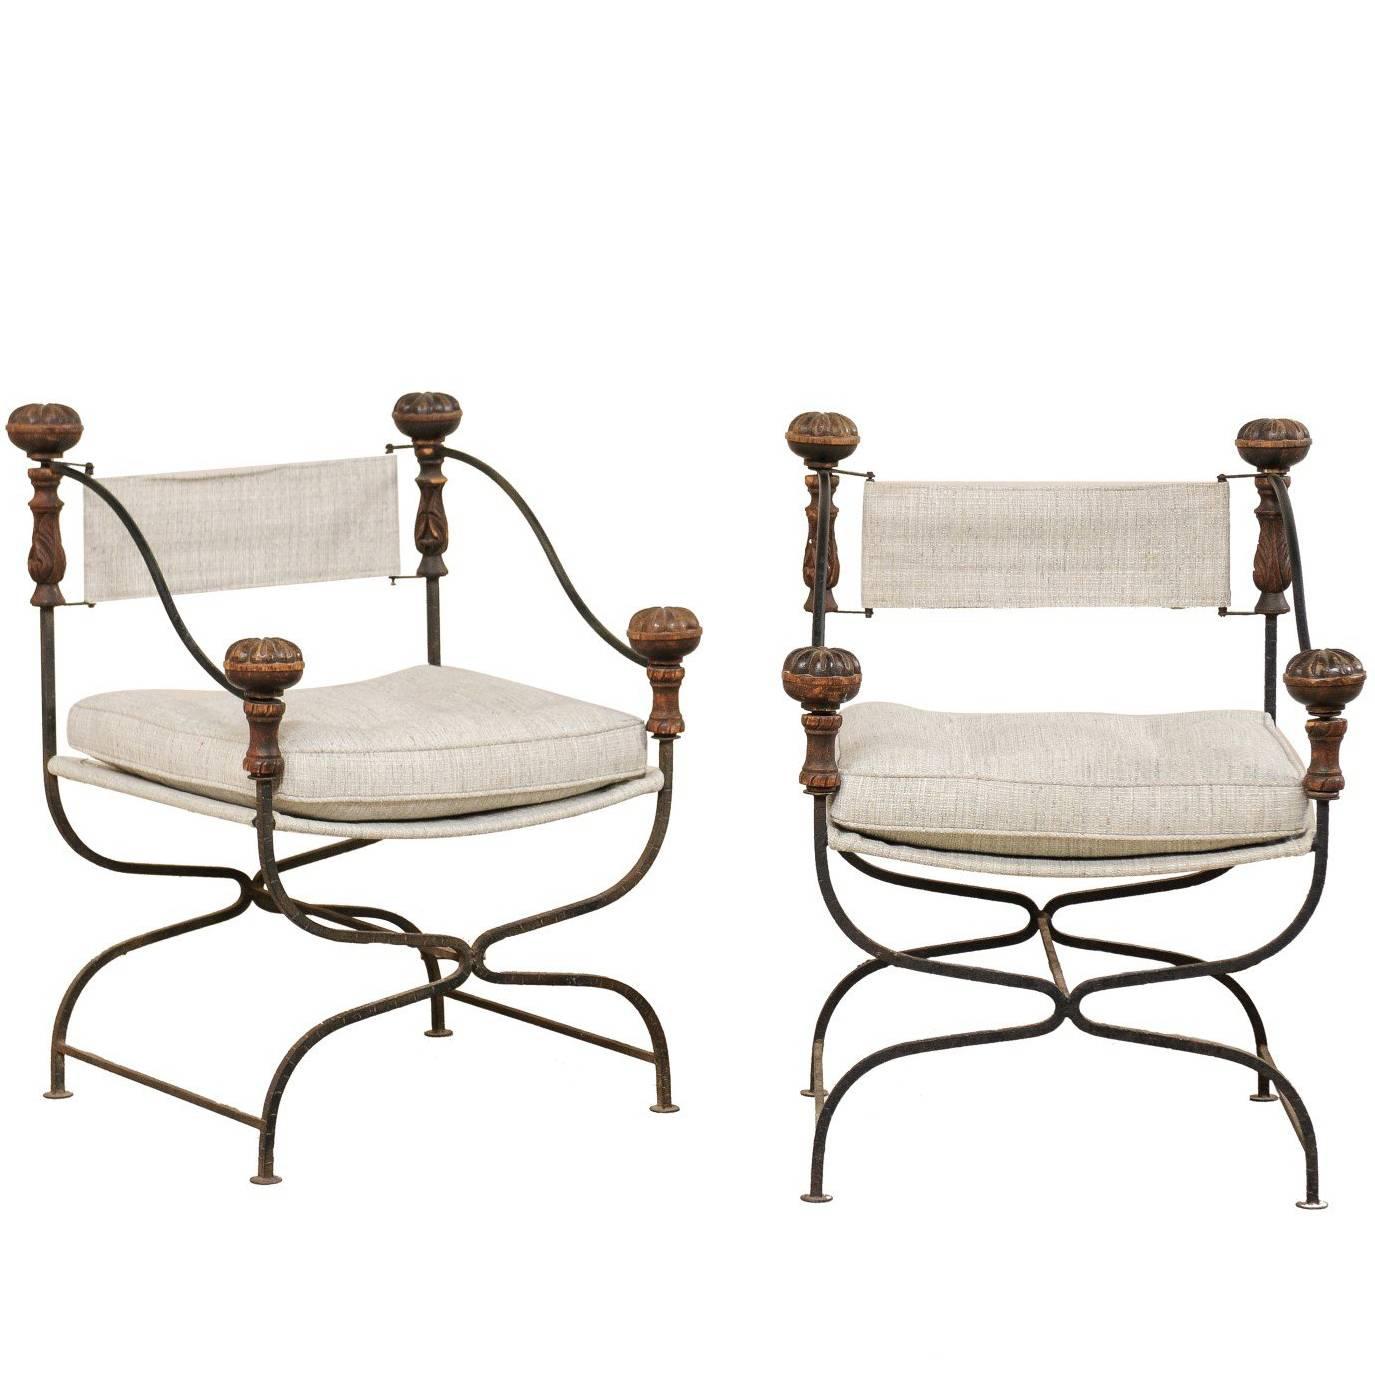 Pair of Italian Dante Iron and Upholstered Chairs with Carved Round Finials